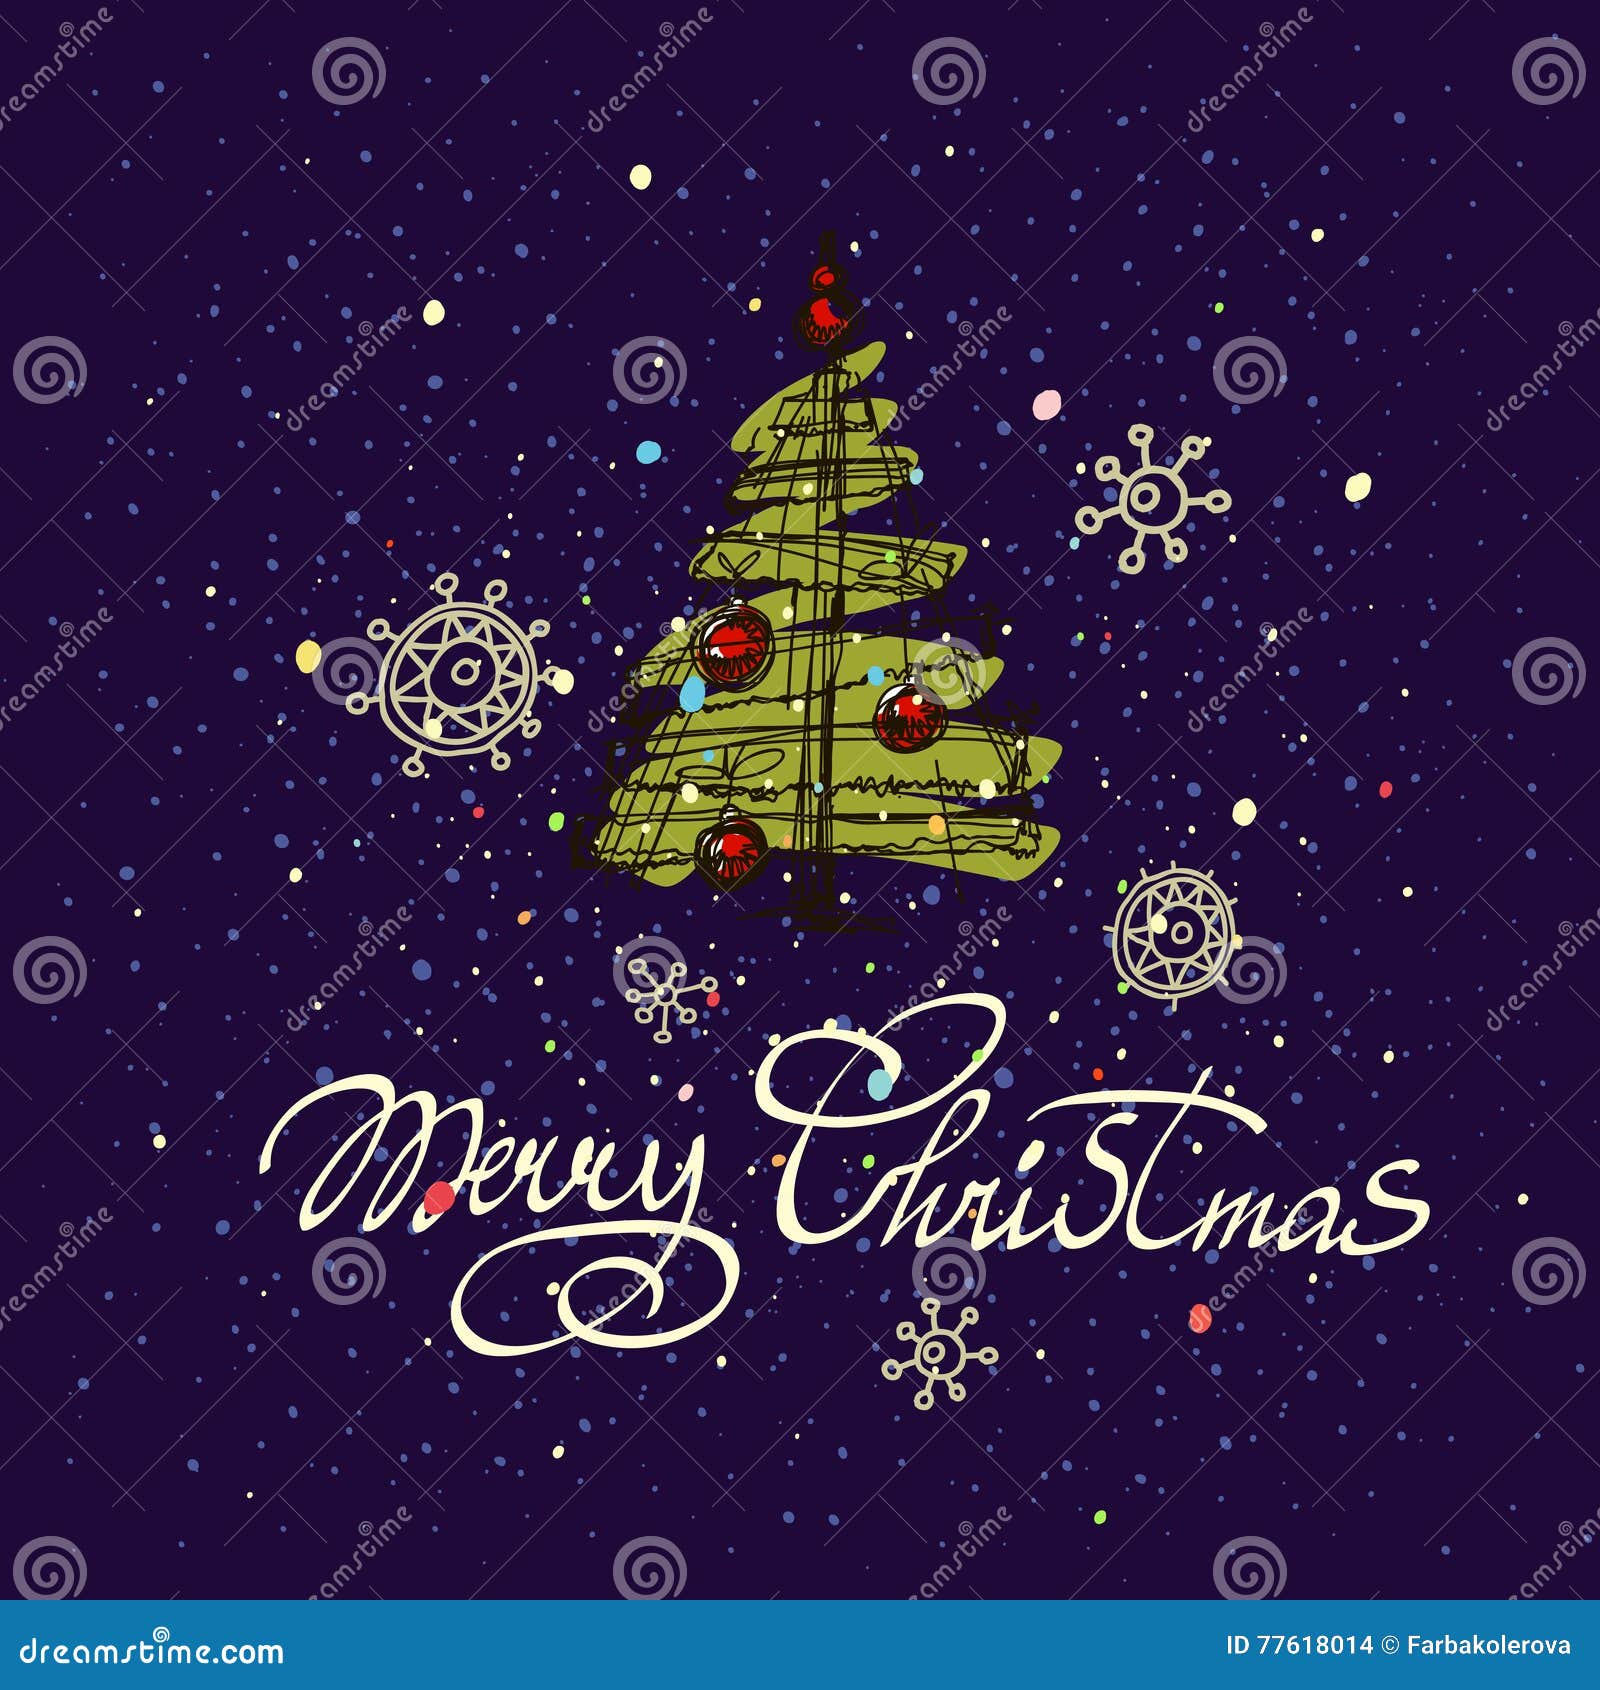 Merry Christmas Hand Lettering On Dark Background. Vector Image ...